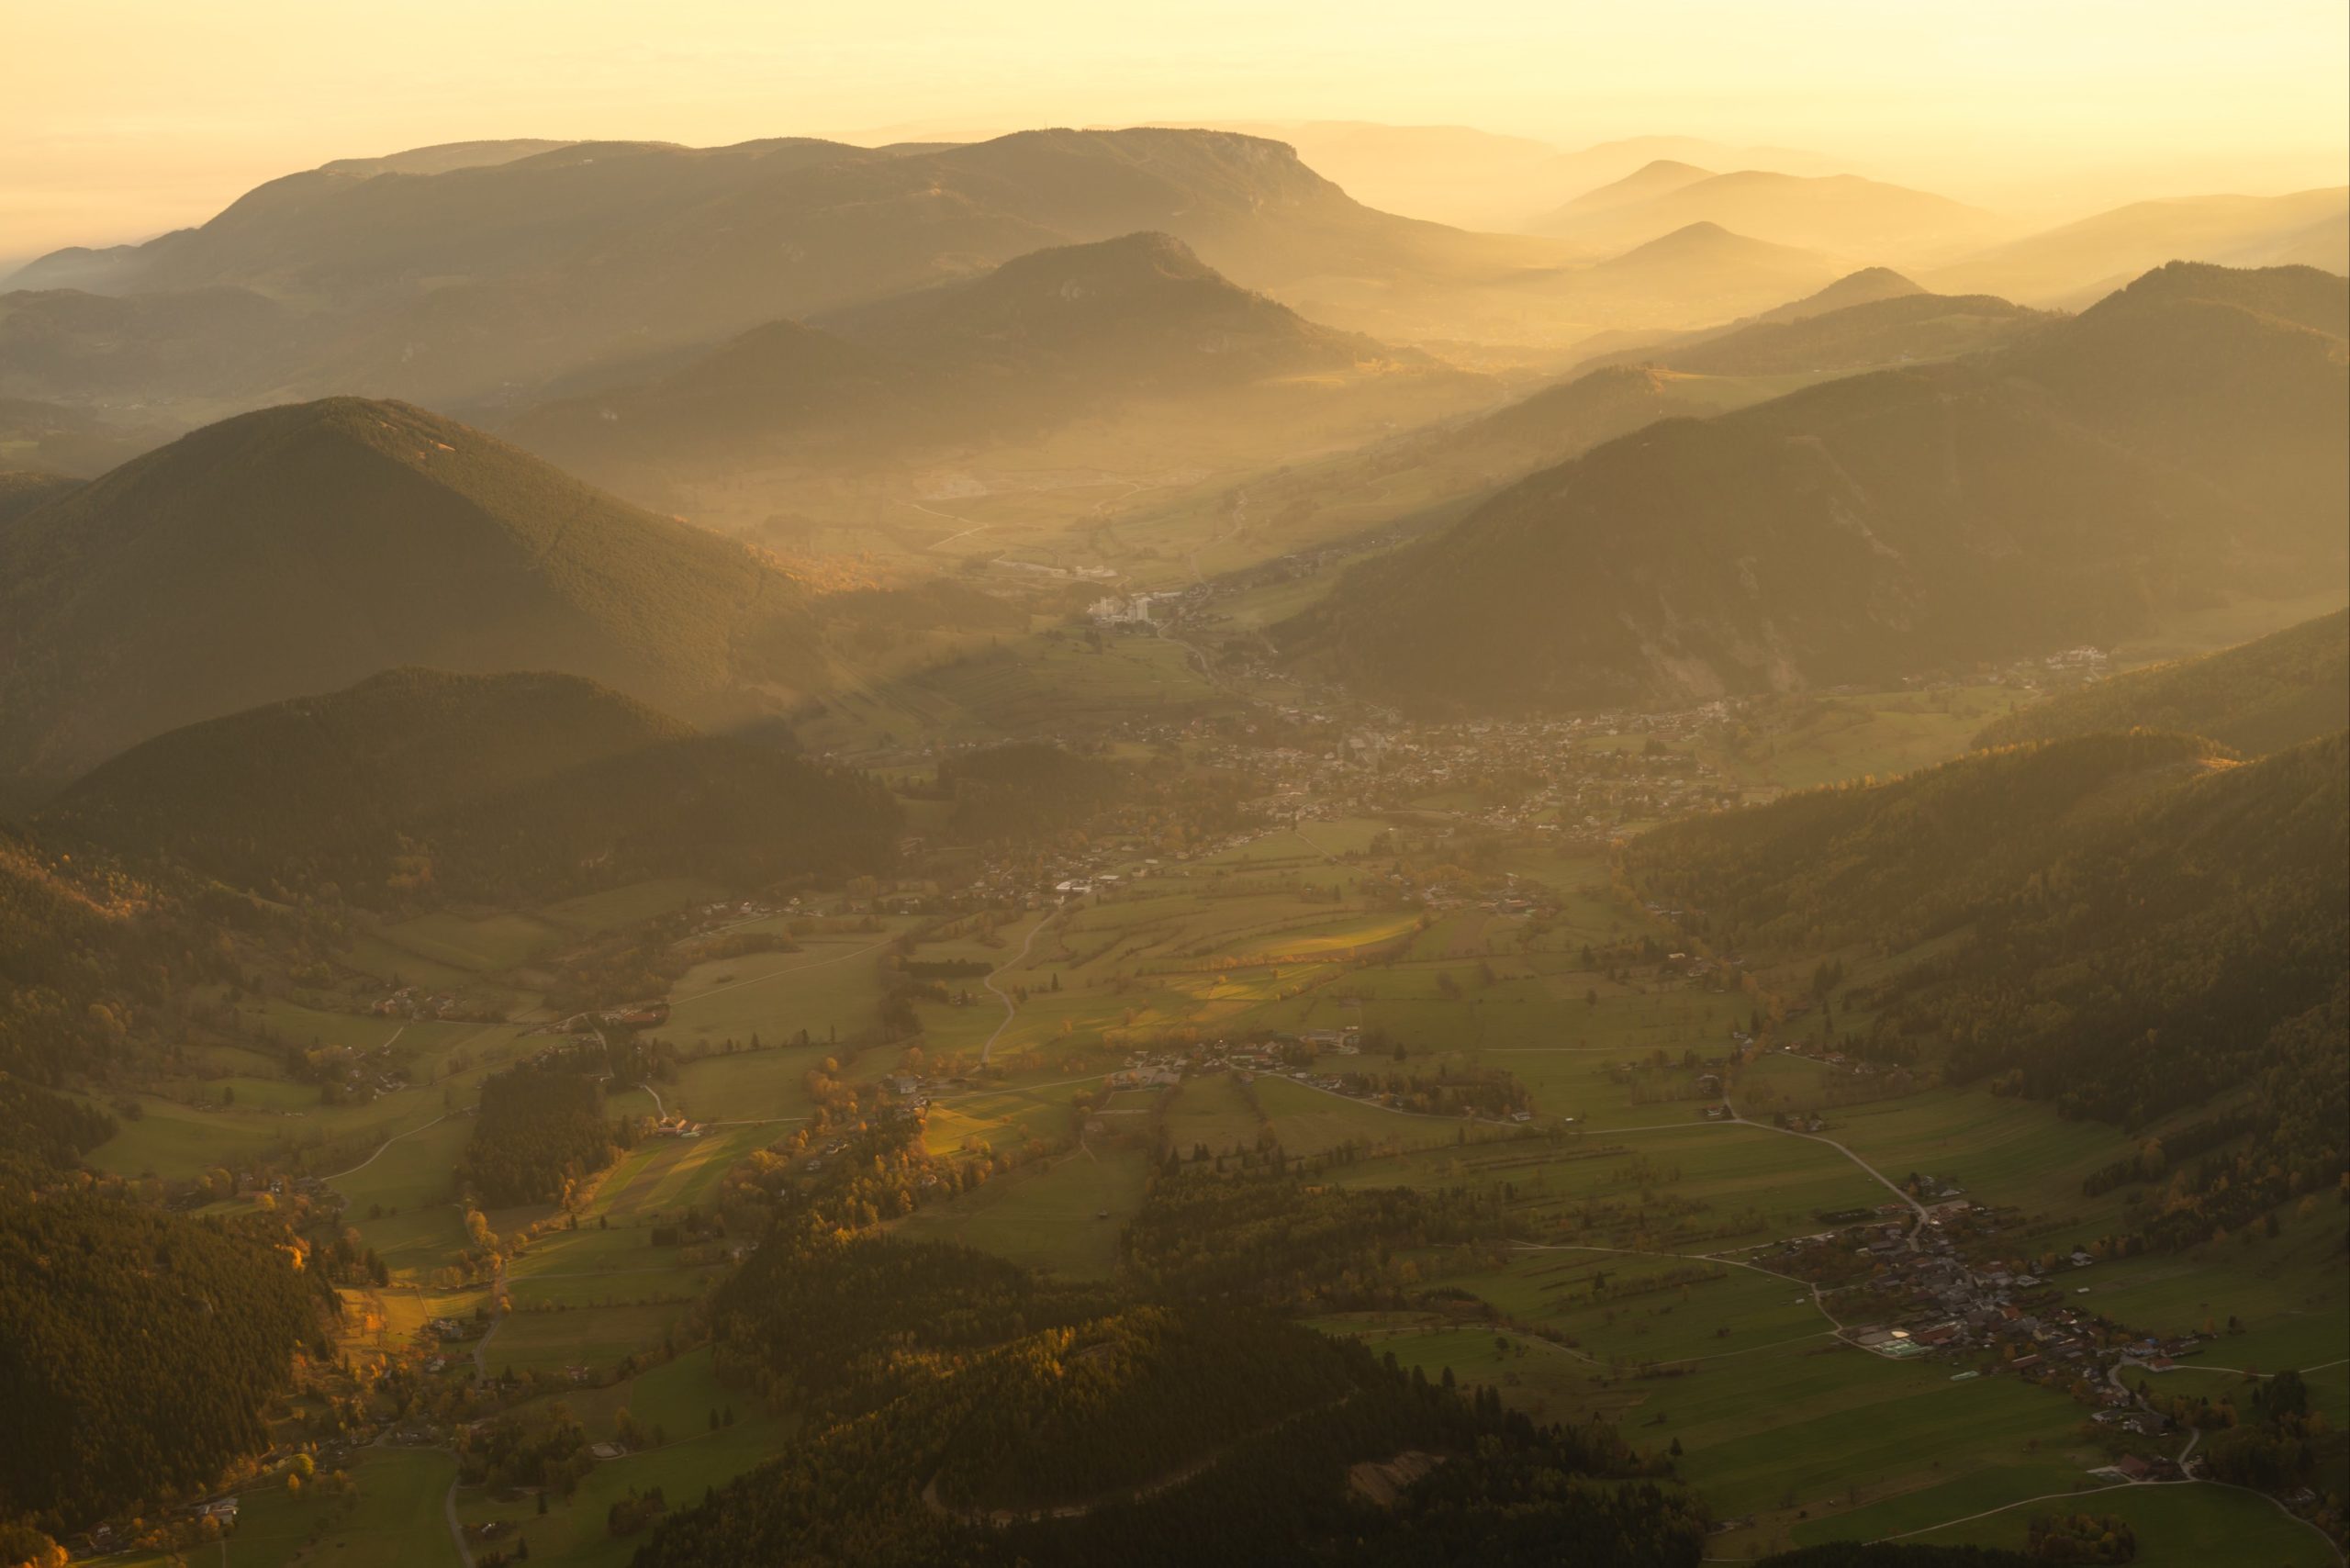 Warm autumn morning light and fog over Puchberg village and the surrounding mountains during sunrise from the top of Schneeberg